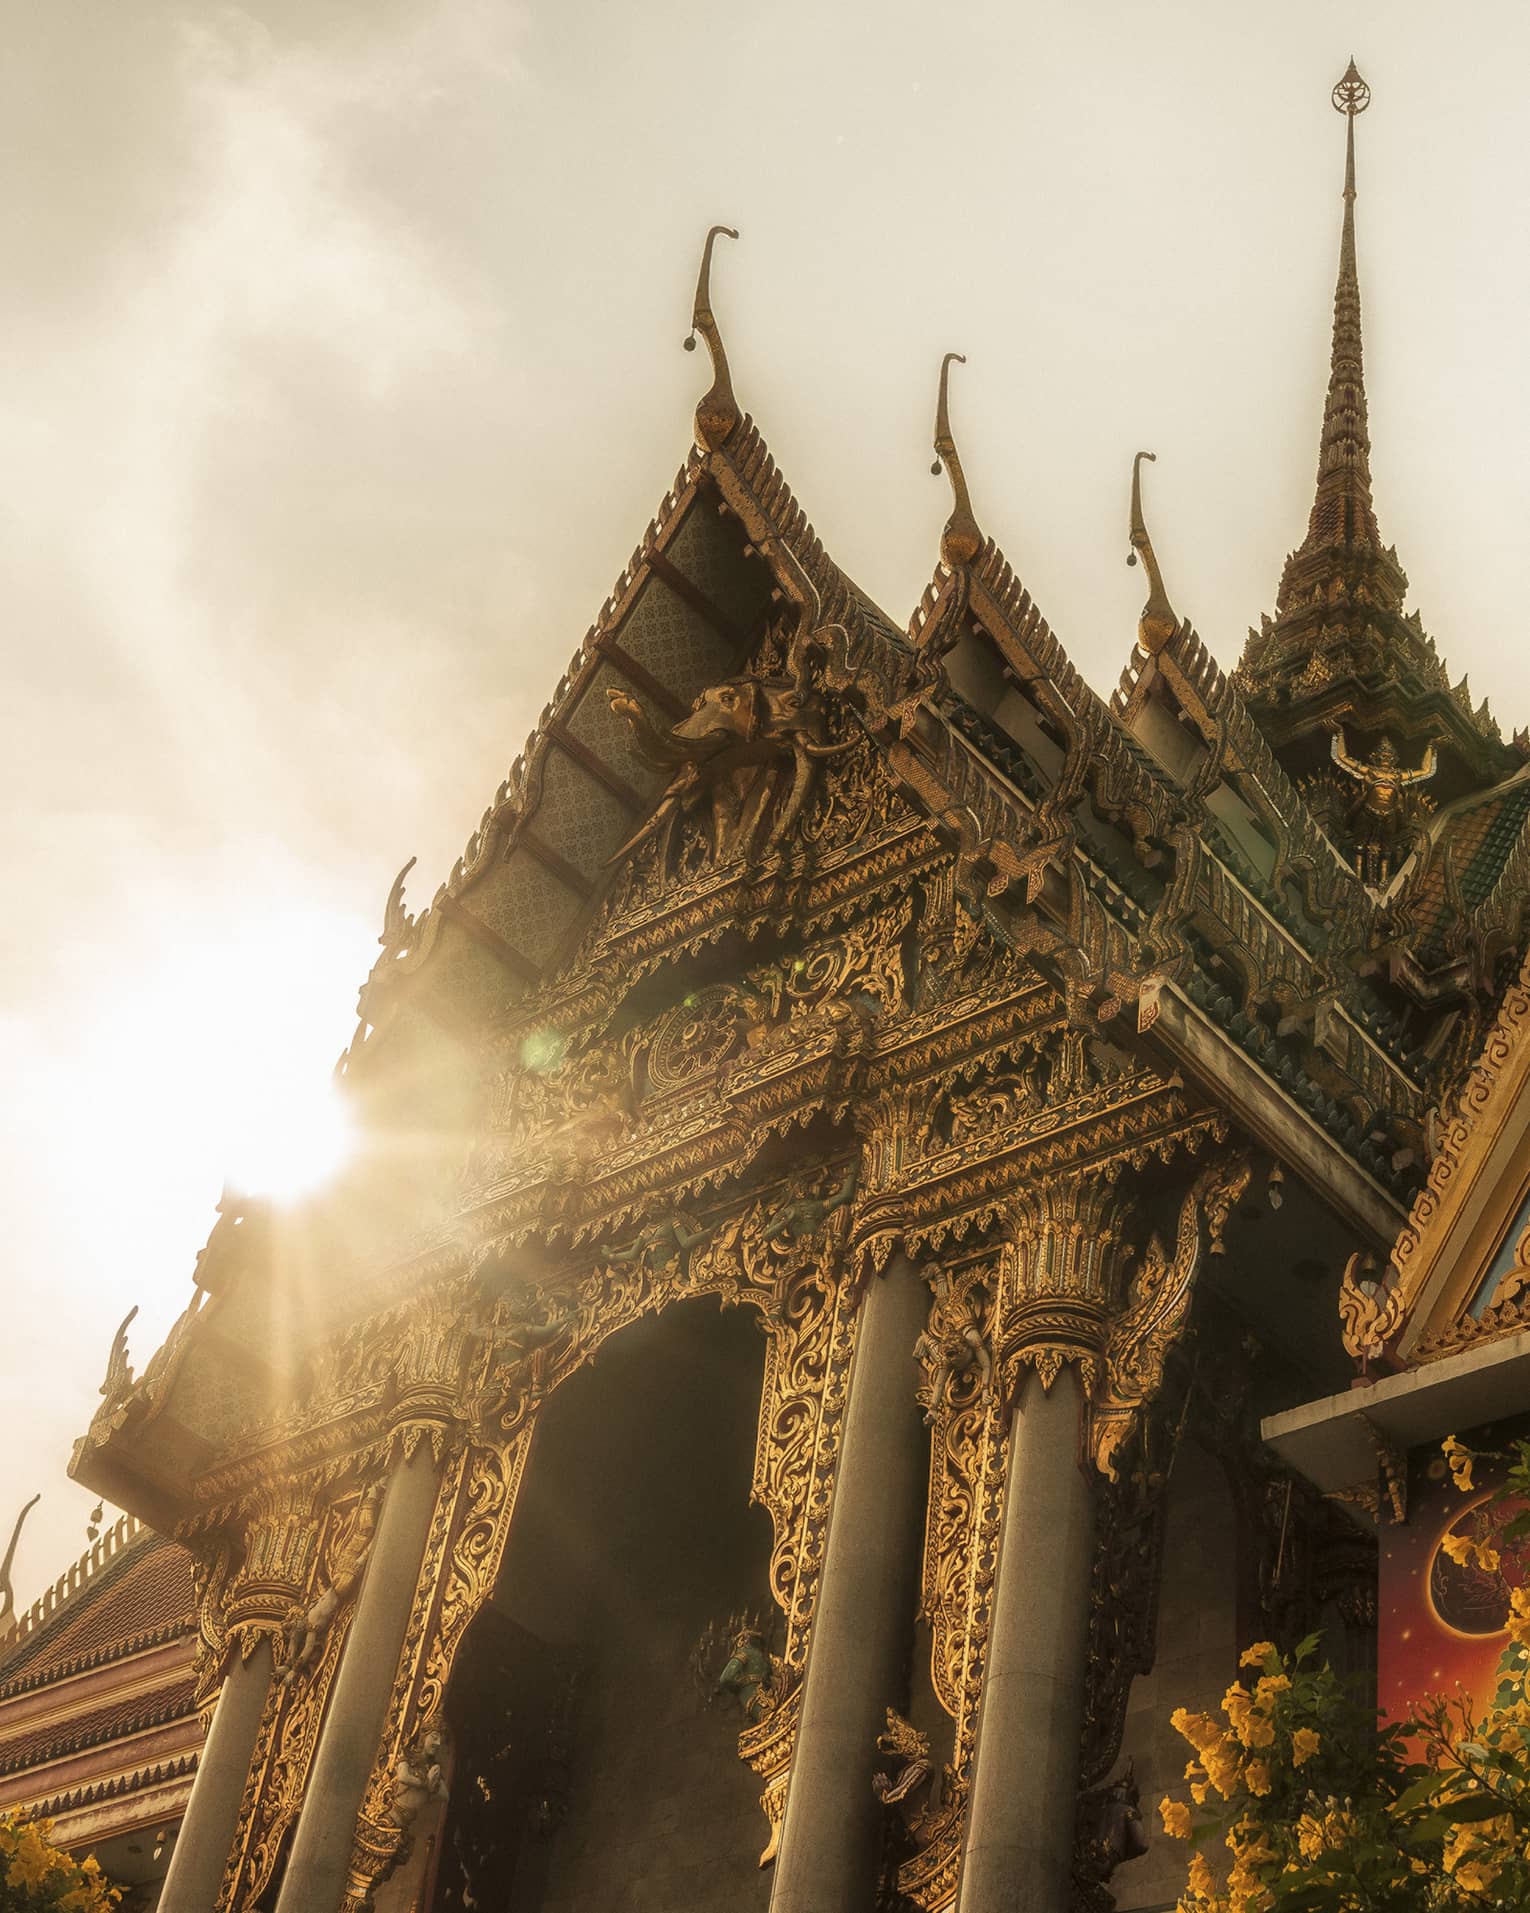 A Thai temple at sunrise, with ornate golden spires and chofahs, exuding tranquility.